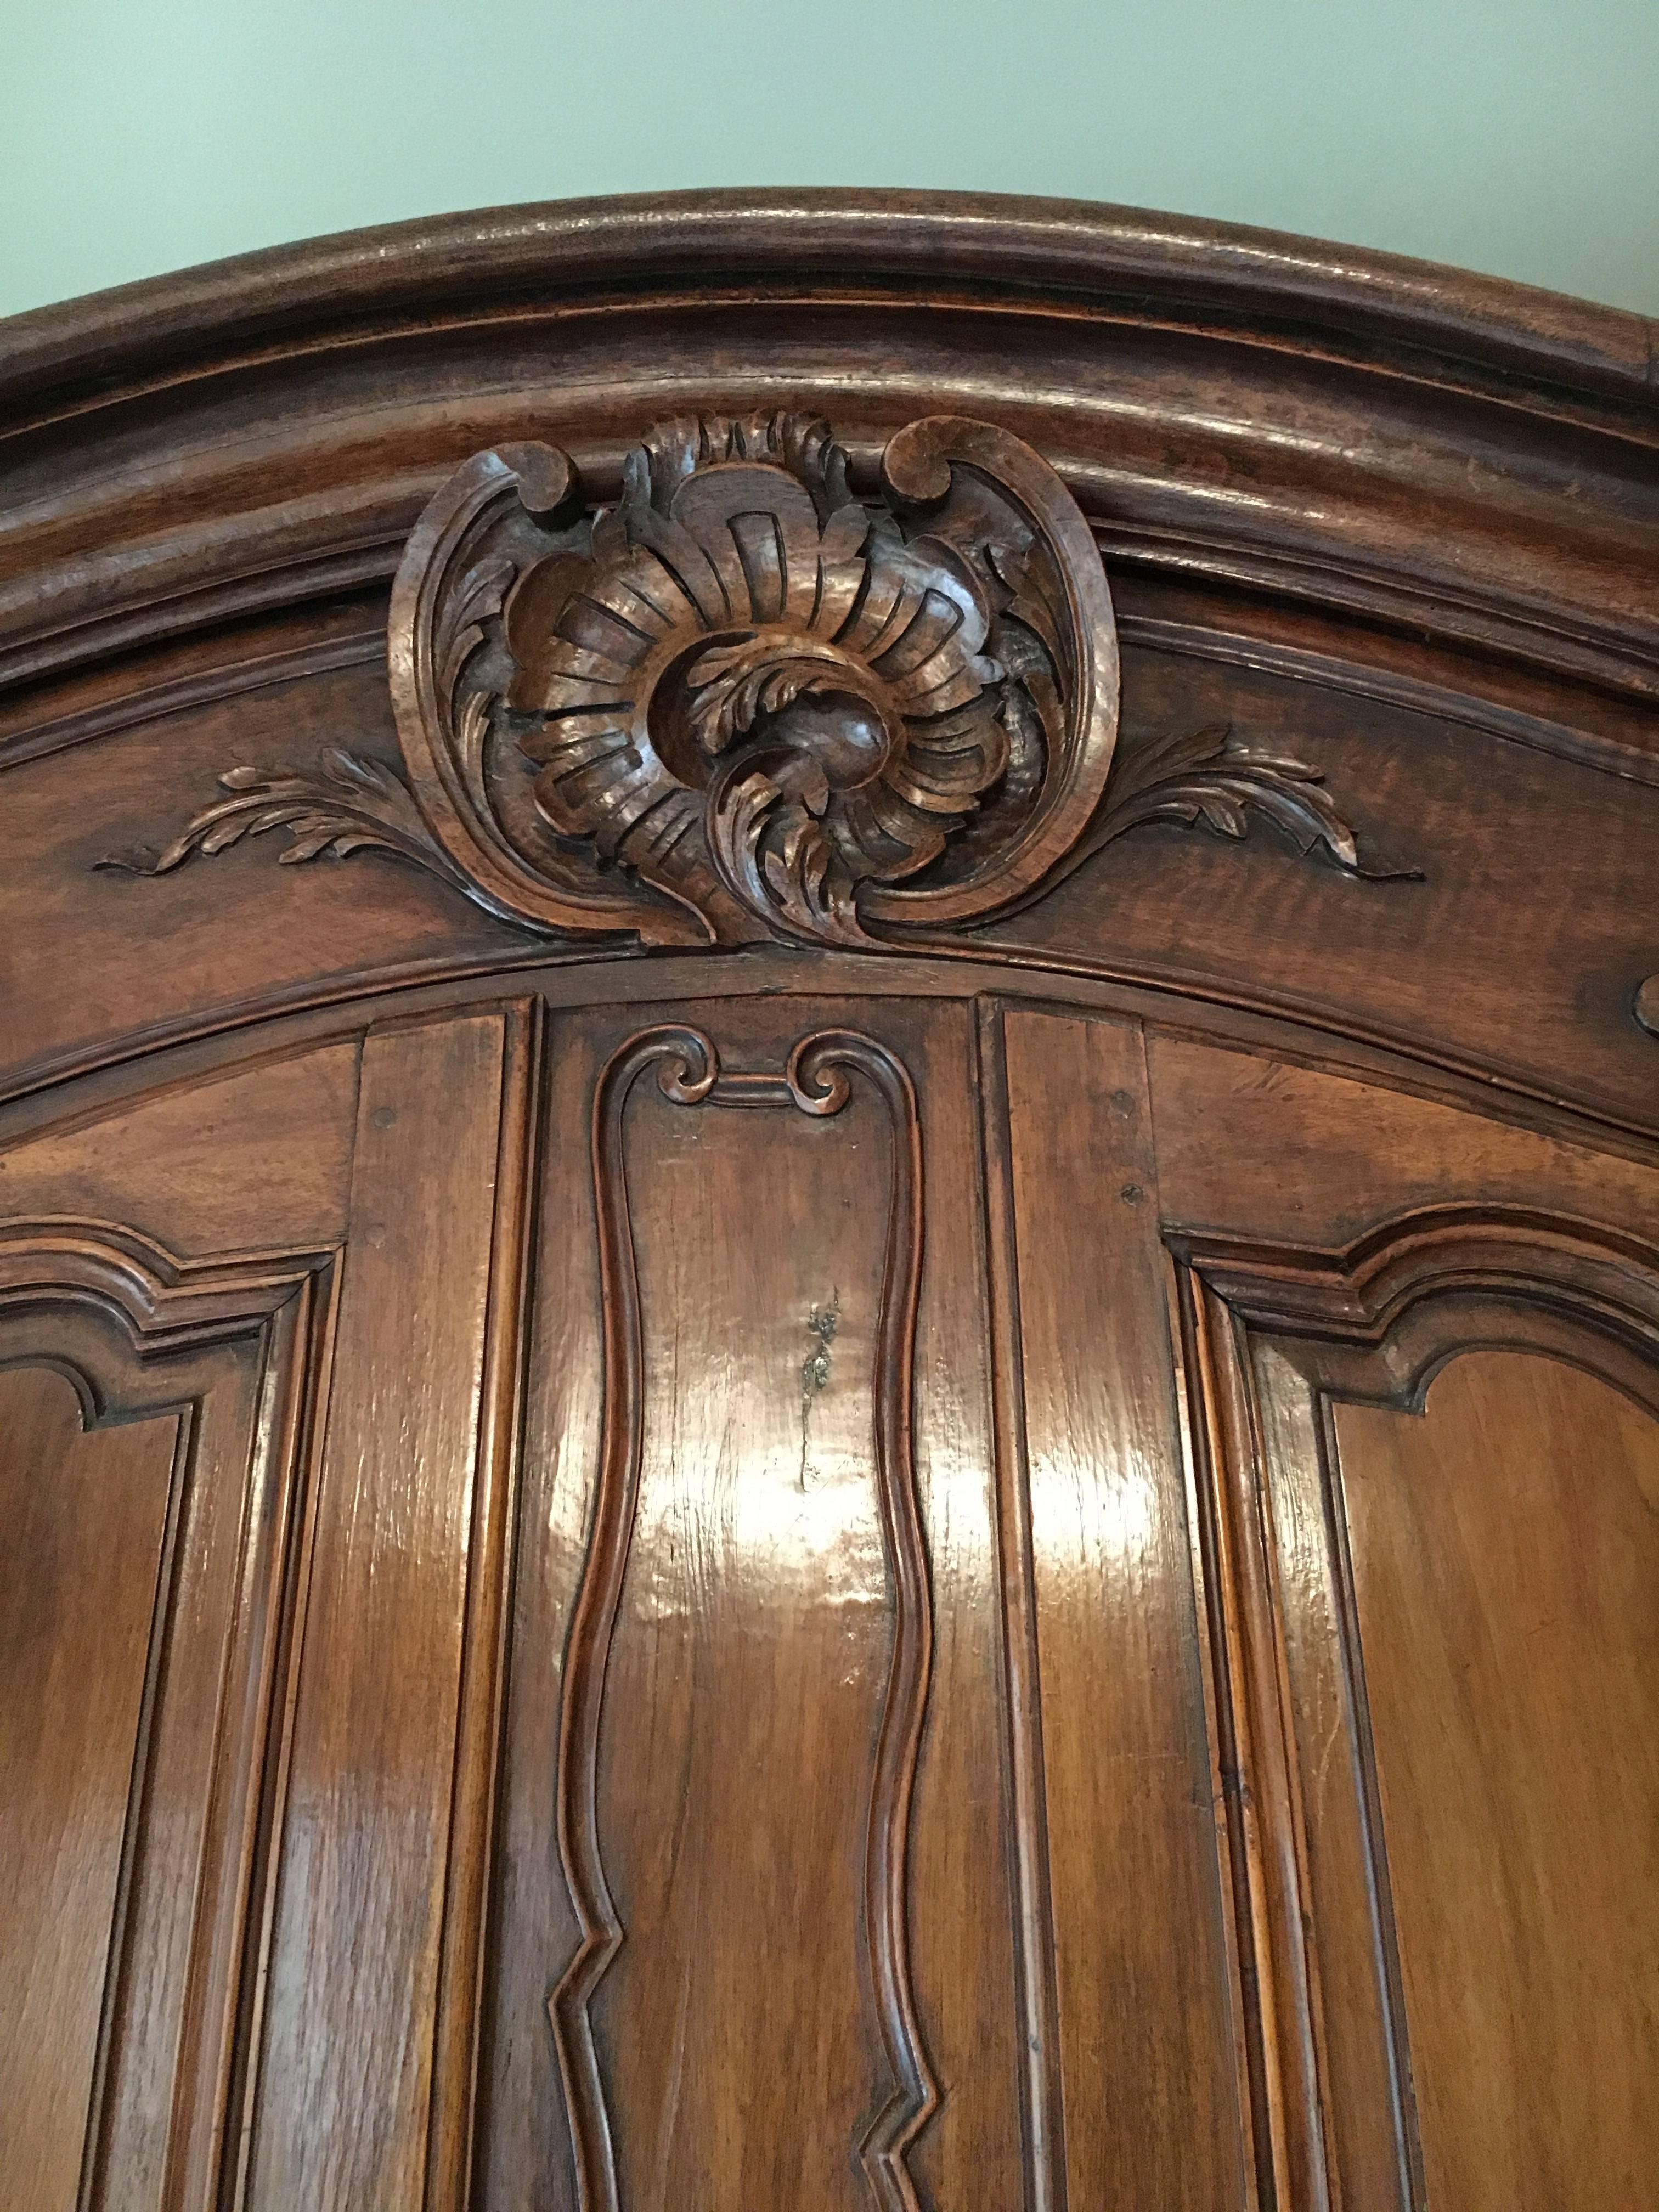 A fine Provençal French Louis XV period walnut armoire of large size and exceptional quality. The armoire is Provençal in protein, and dates from the mid-1700s. The armoire features an arched cornice with central cabochon design and a pierced apron